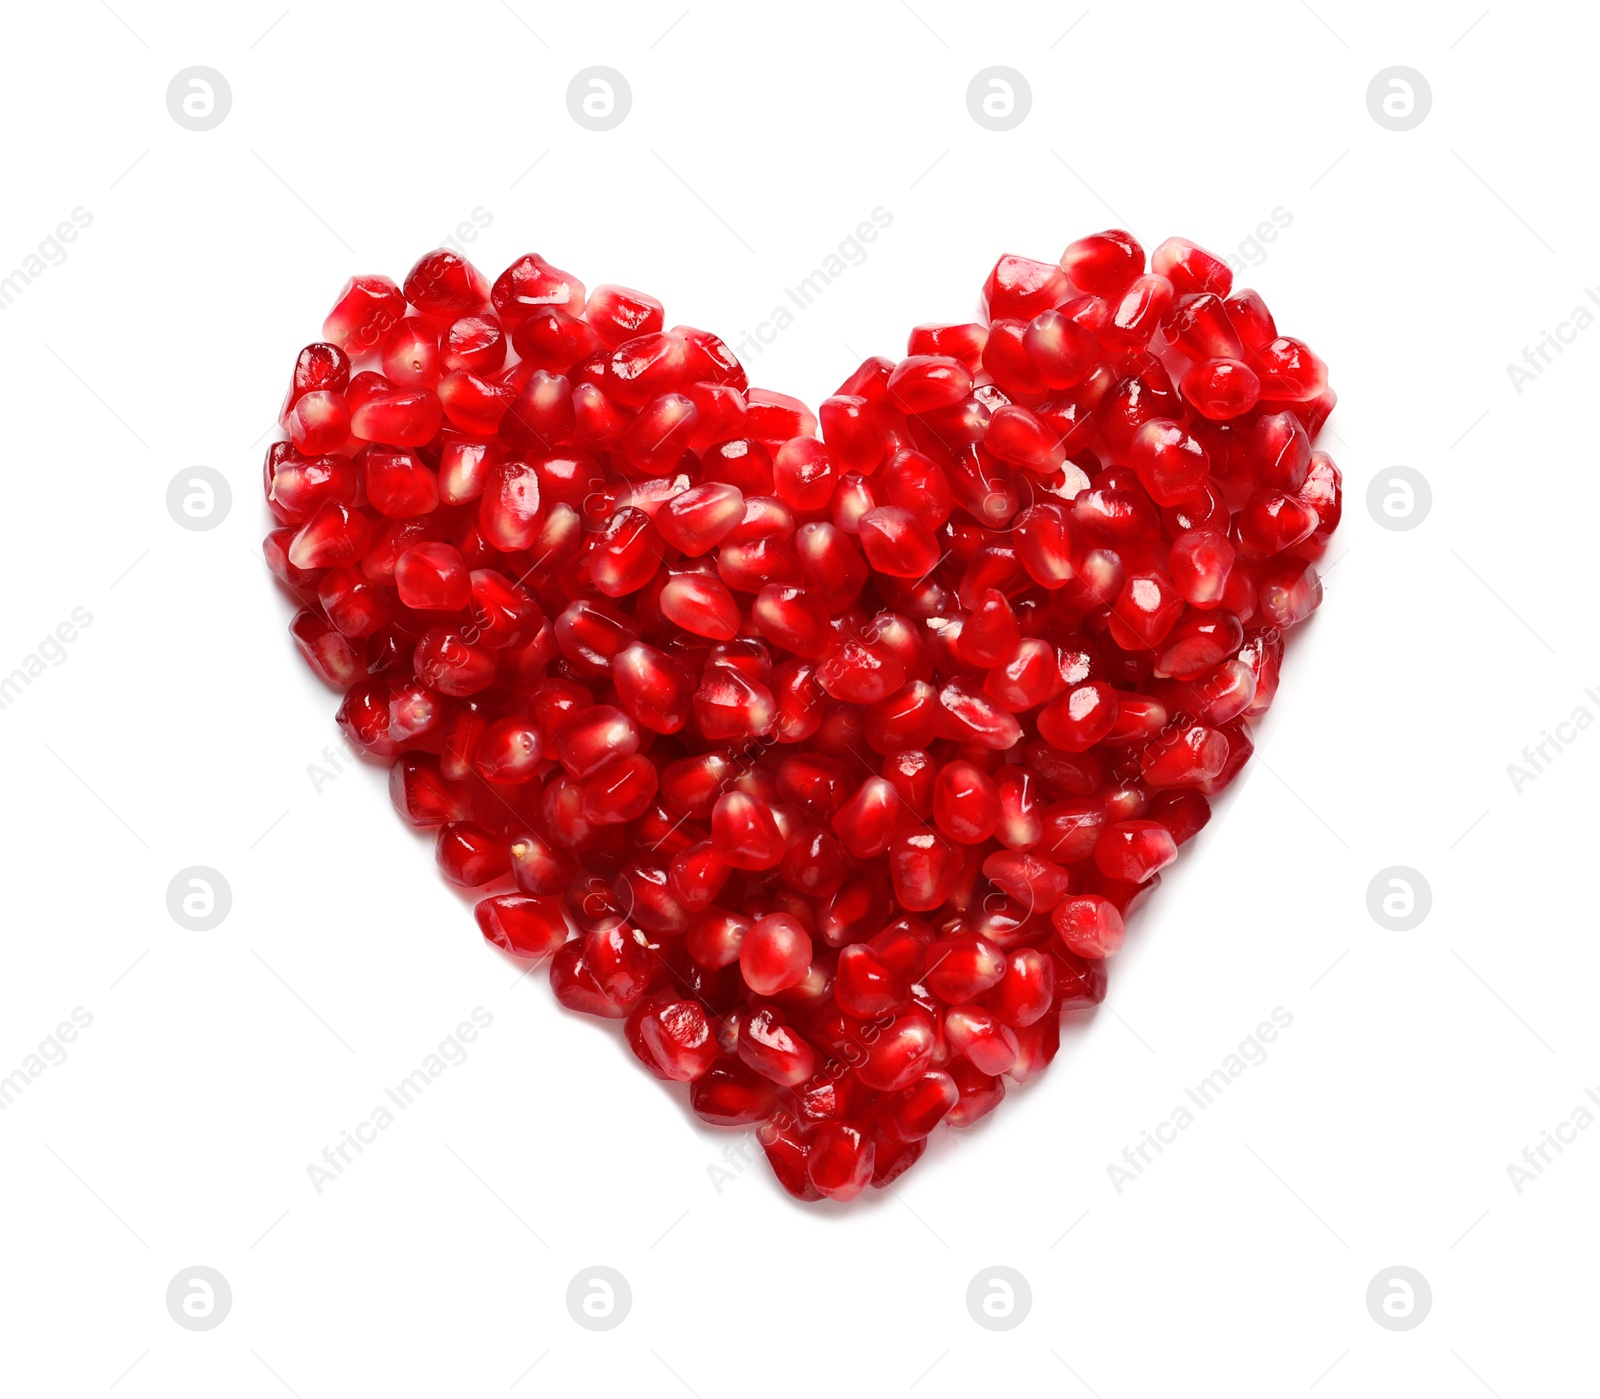 Photo of Heart made of pomegranate seeds on white background, top view. Healthy diet